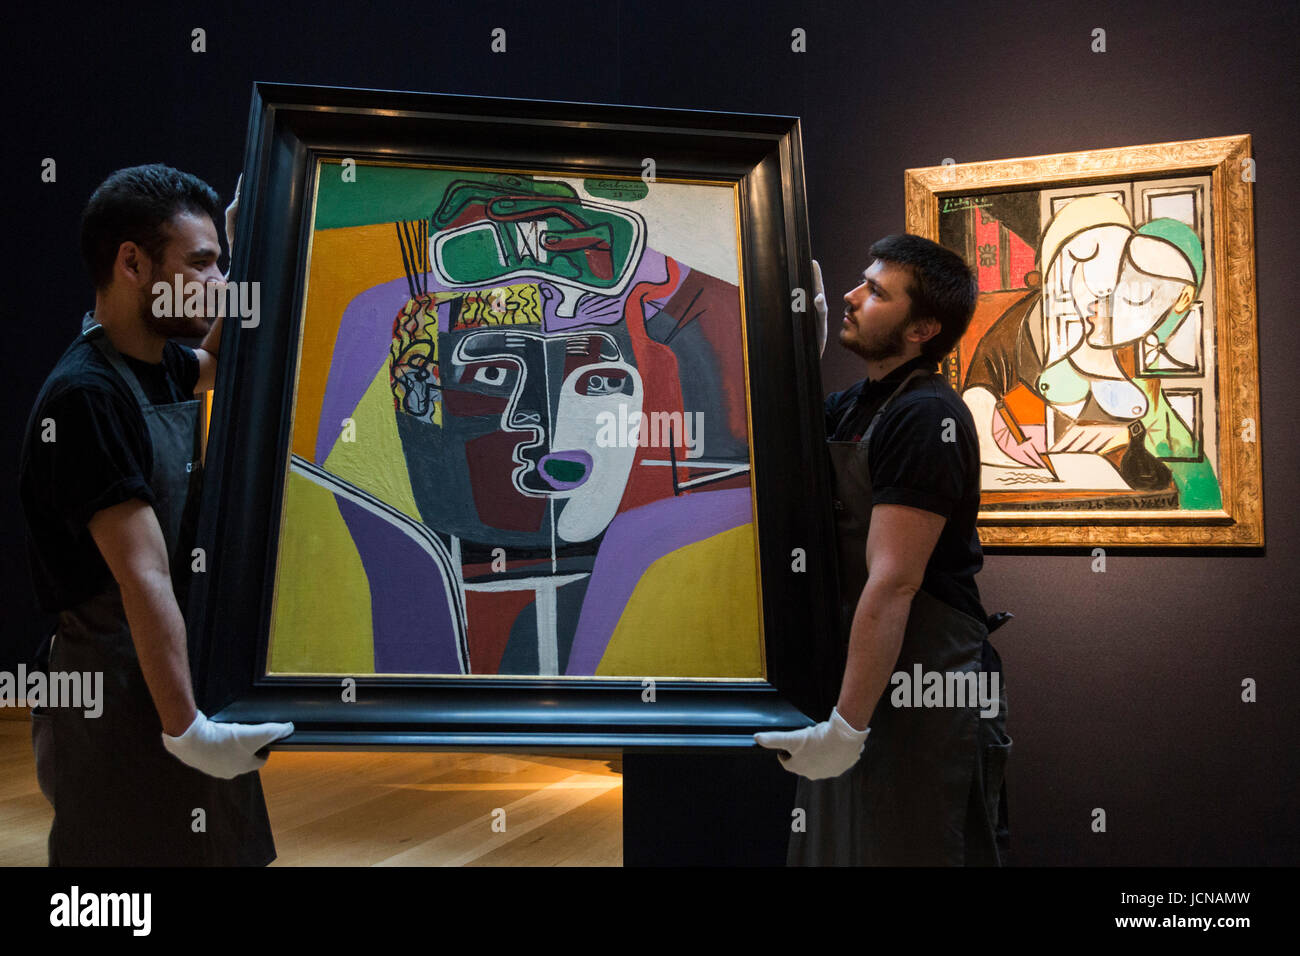 London, UK. 16 June 2017. Christie's technicians handling the painting Mains croisees sur la tete, 1939-40, by Le Corbusier, est GBP 1.2-2m which is influenced by Pablo Picasso. At the back the Pablo Picasso painting Femme ecrivant (Marie-Therese), 1934, est GBP 25-40m. Auction house Christie's presents a preview of the Impressionist and Modern Art evening sale on 27 June 2017. The sale is part of 20th Century at Christie's and is led by a group of masterpiece paintings by Max Beckmann, Claude Monet, Pablo Picasso, Egon Schiele and Vincent van Gogh. Stock Photo